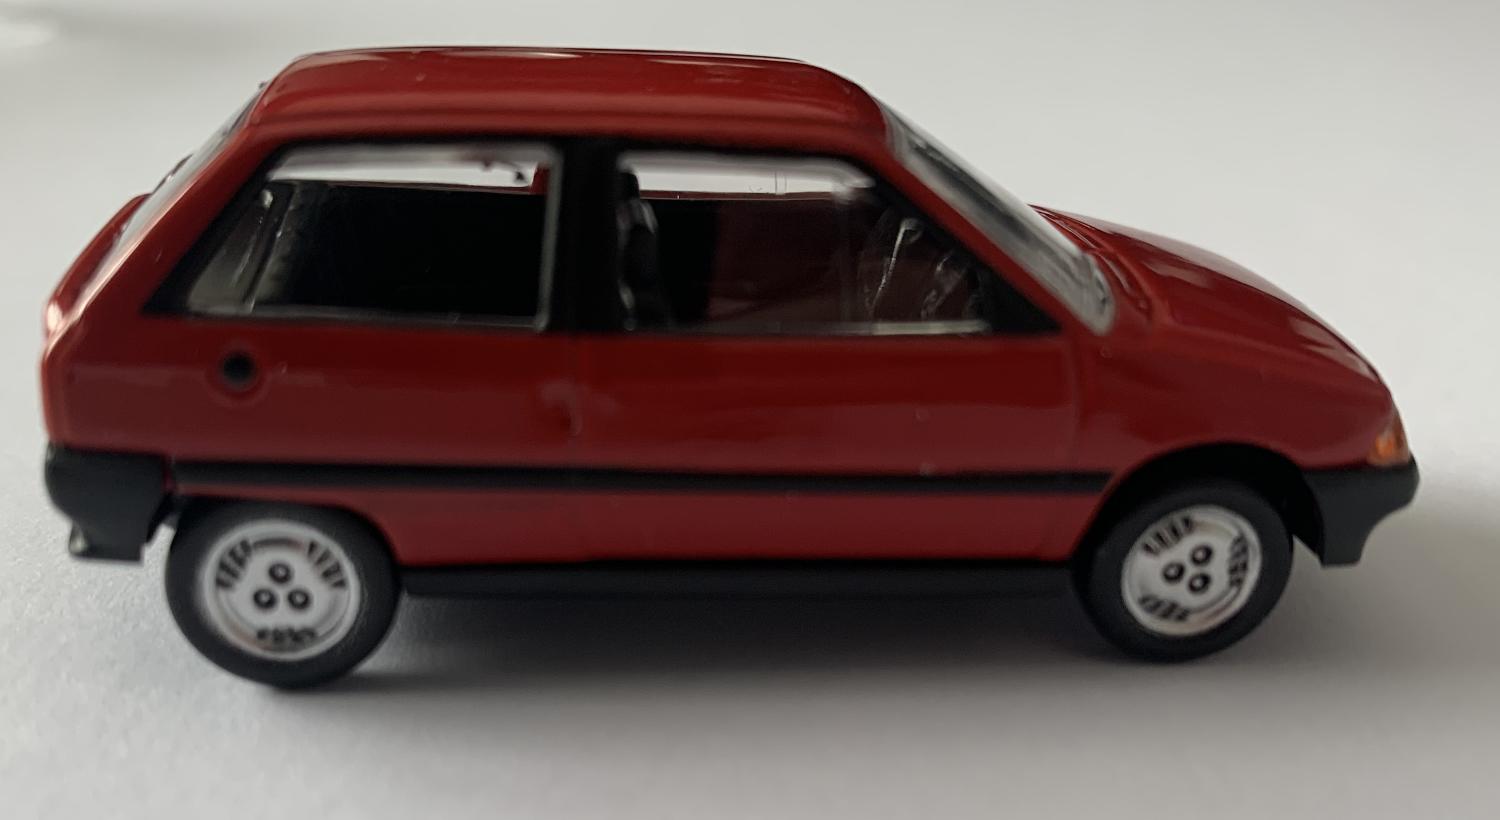 A good reproduction of the Citroen AX presented in a window display box